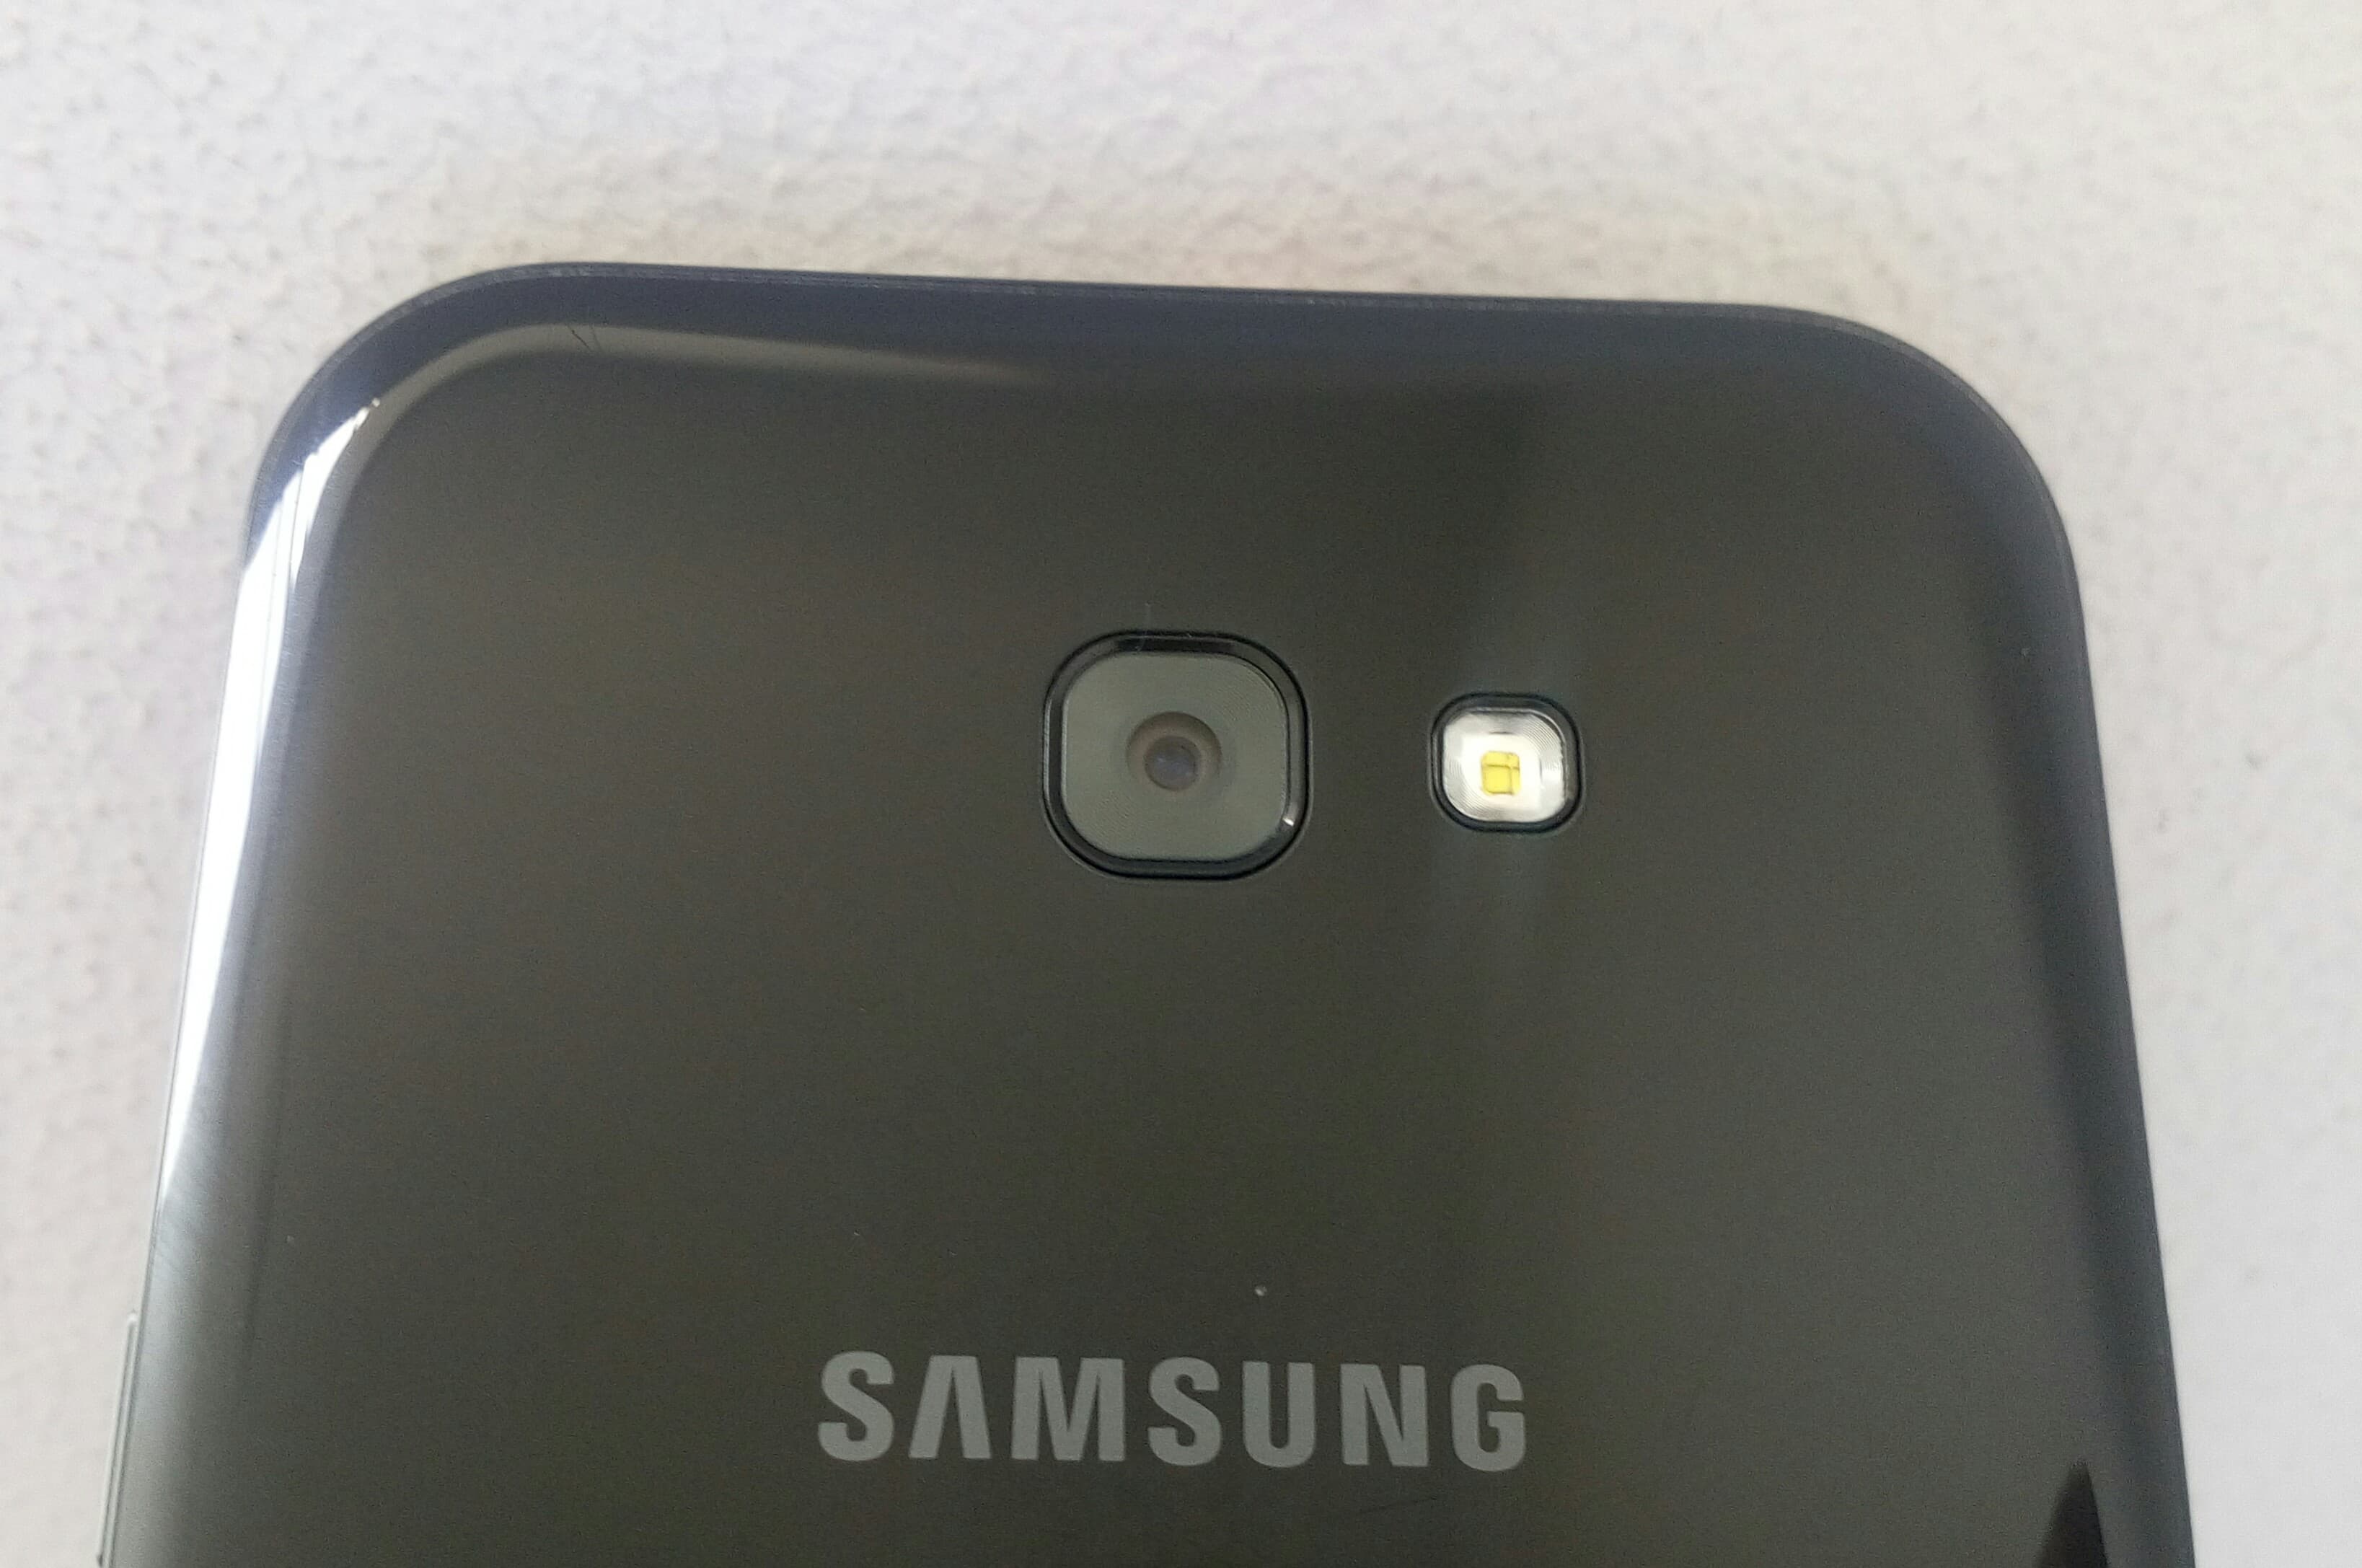 Samsung Galaxy A5 2017 Review The Galaxy S7 Doppelganger